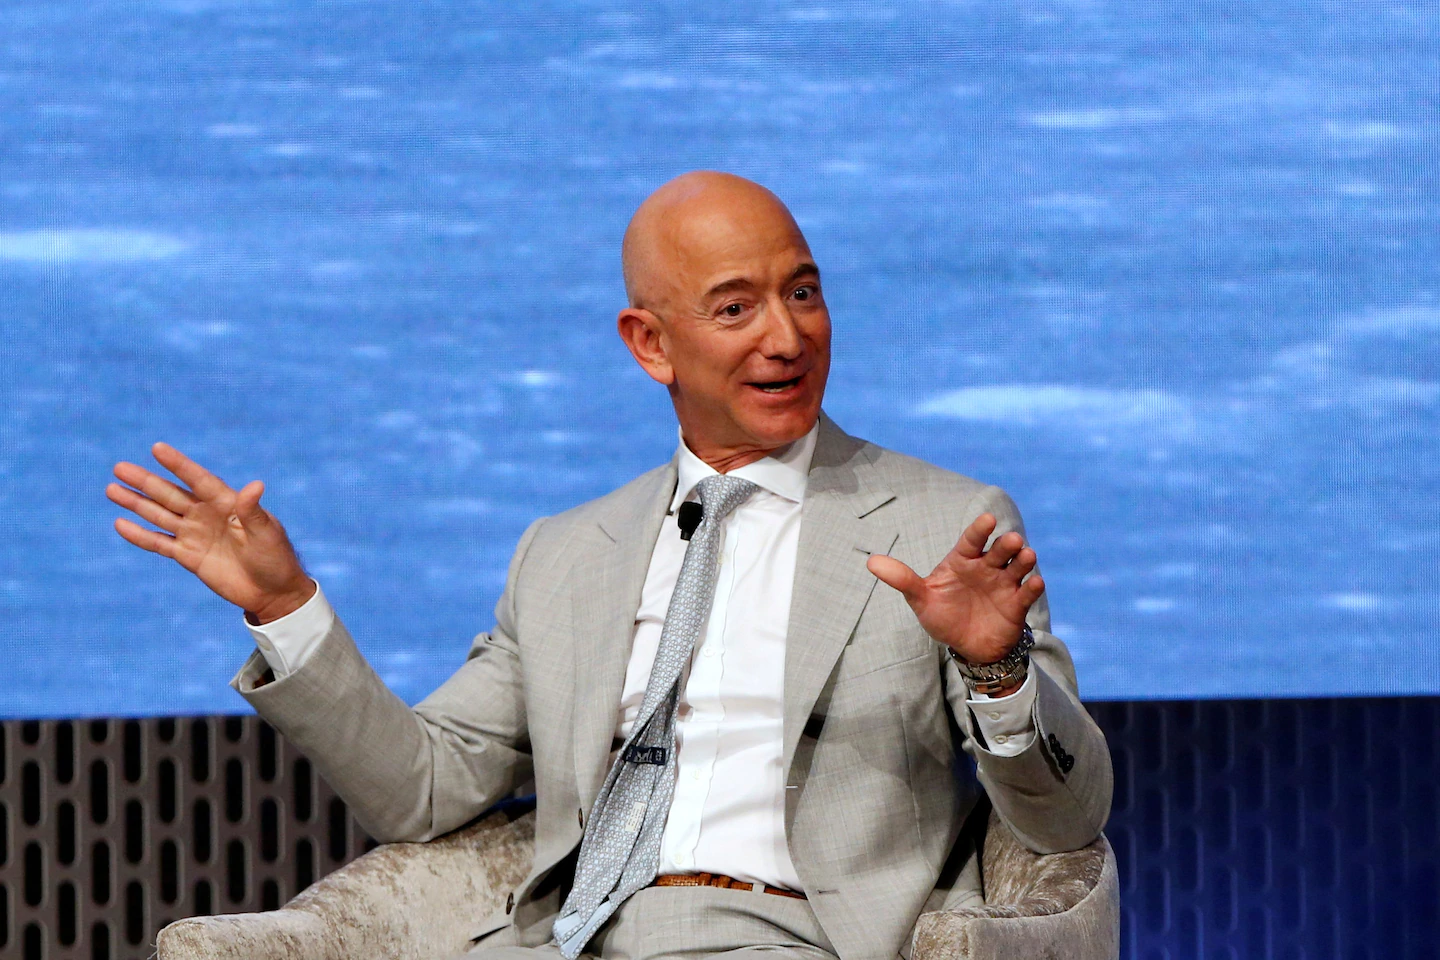 Amazon CEO Jeff Bezos signals openness to testify at congressional antitrust hearing